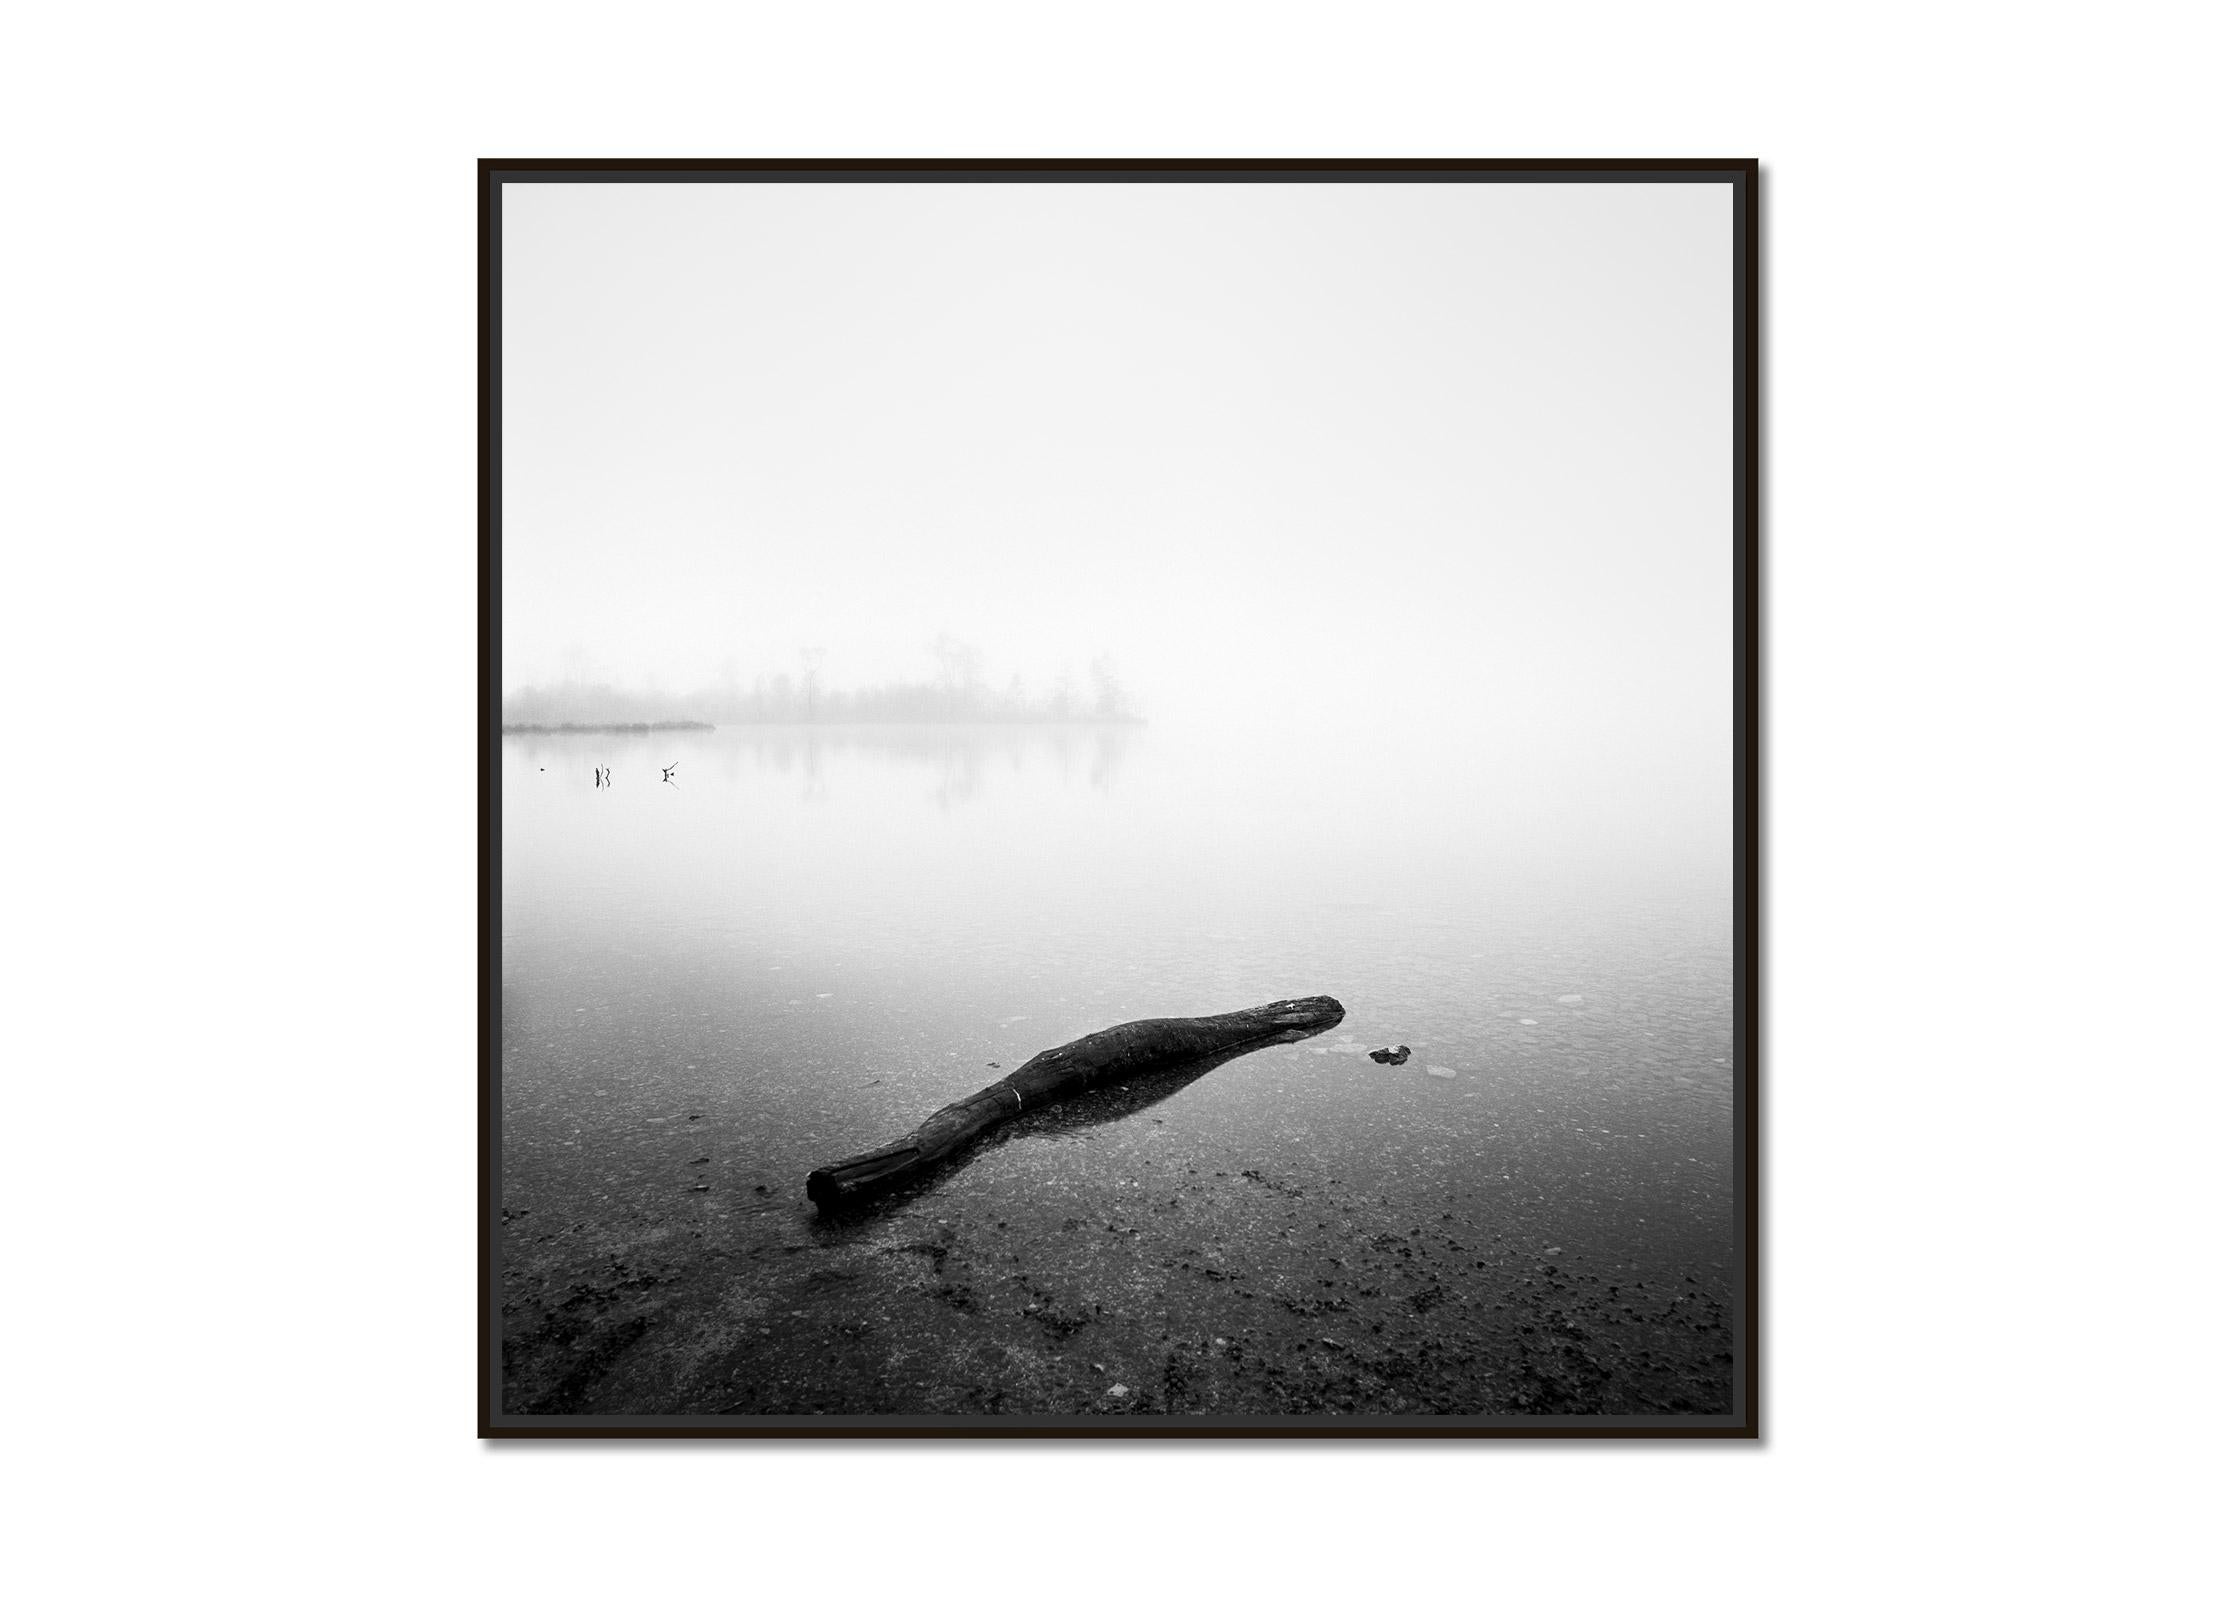 Drift Wood, Lake, Austria, black and white long exposure photography, landscape - Photograph by Gerald Berghammer